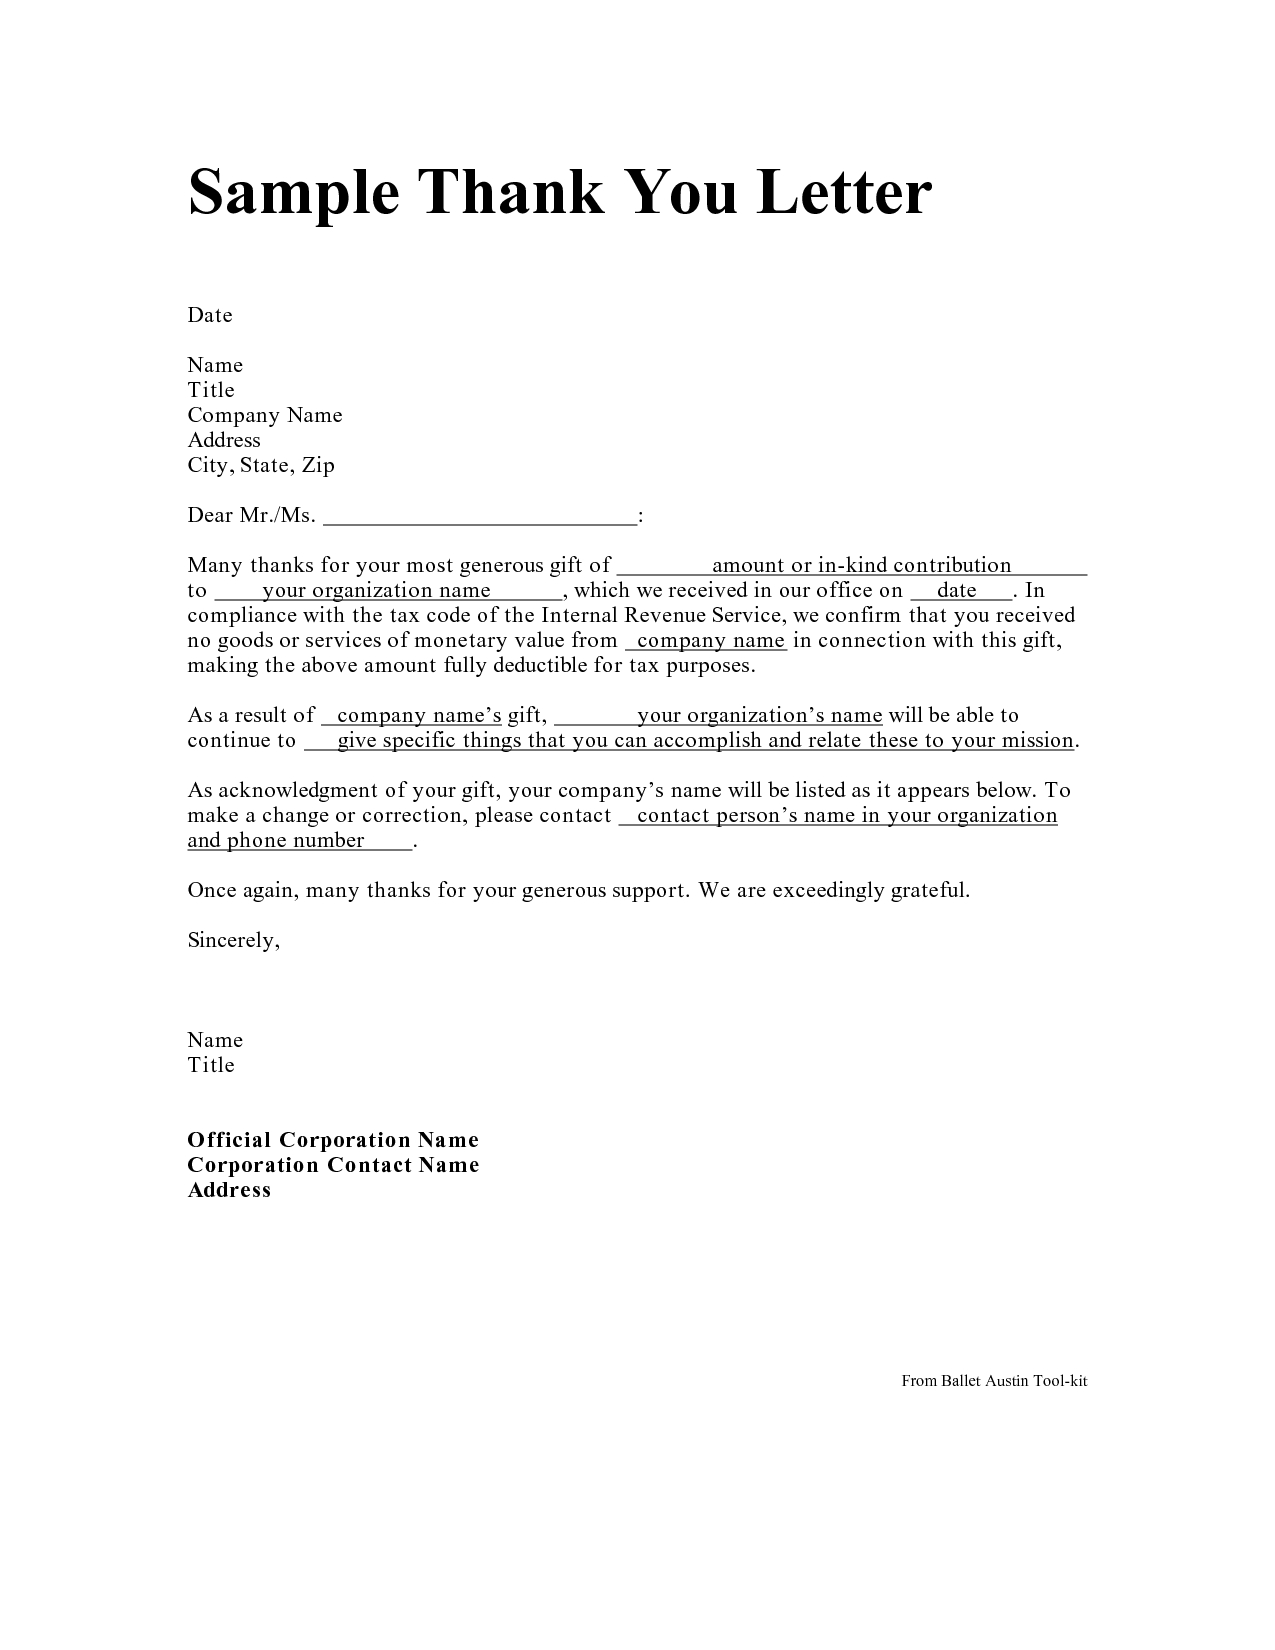 dear seller letter template Collection-Personal Thank You Letter Personal Thank You Letter Samples Writing Thank You Notes Thank You Note Examples 16-i